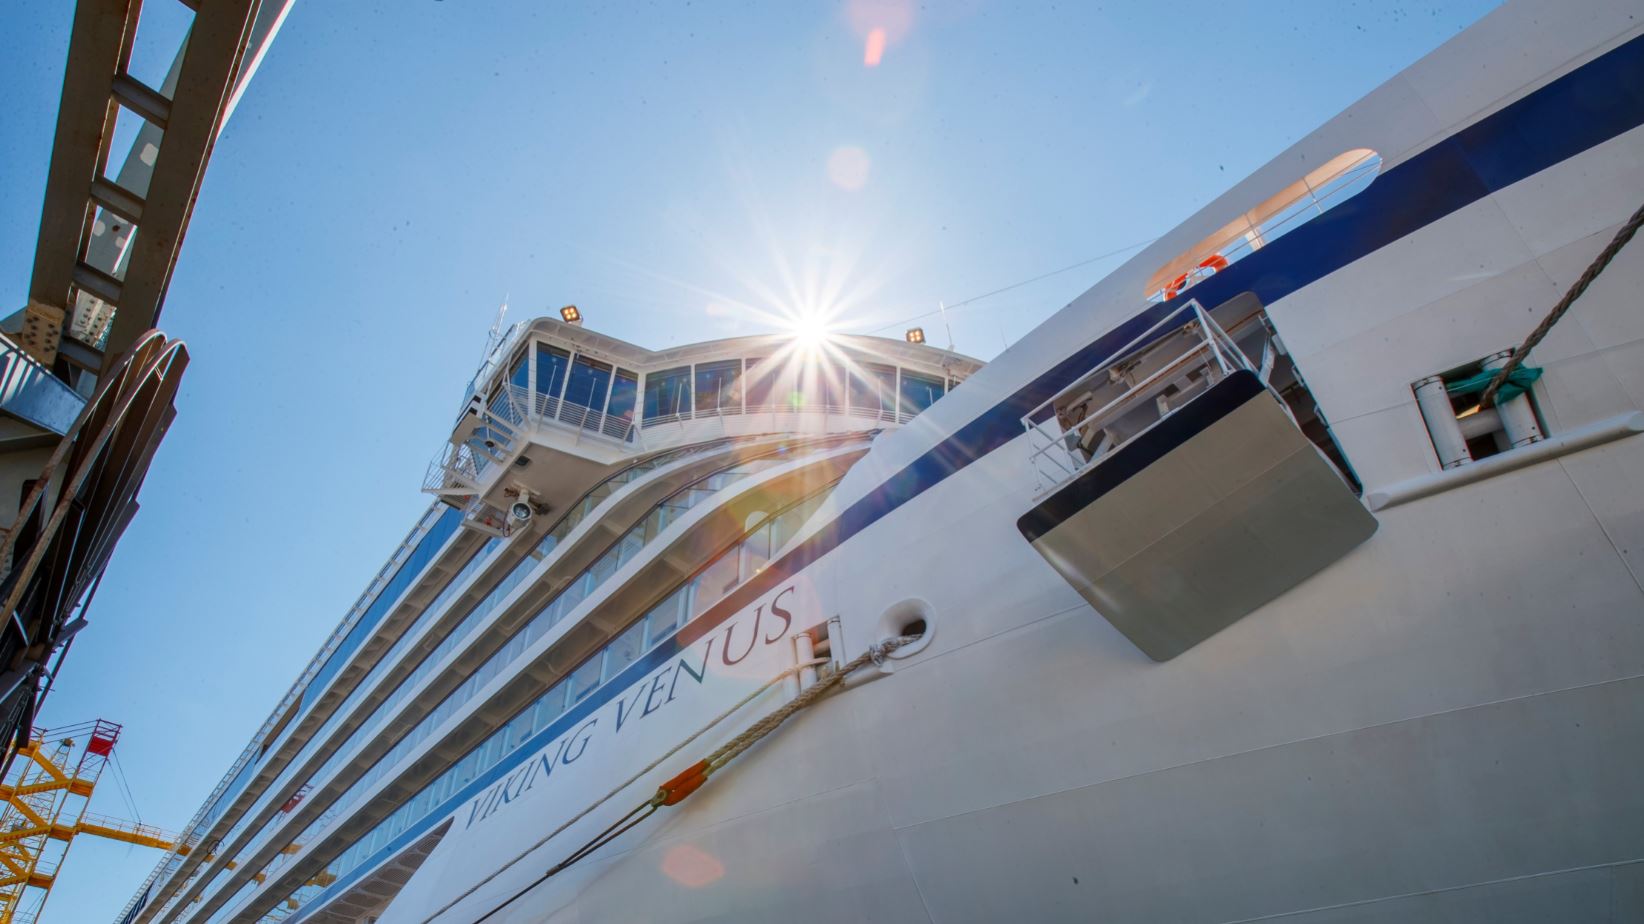 Viking takes delivery of newest ocean ship Viking Venus CRUISE TO TRAVEL